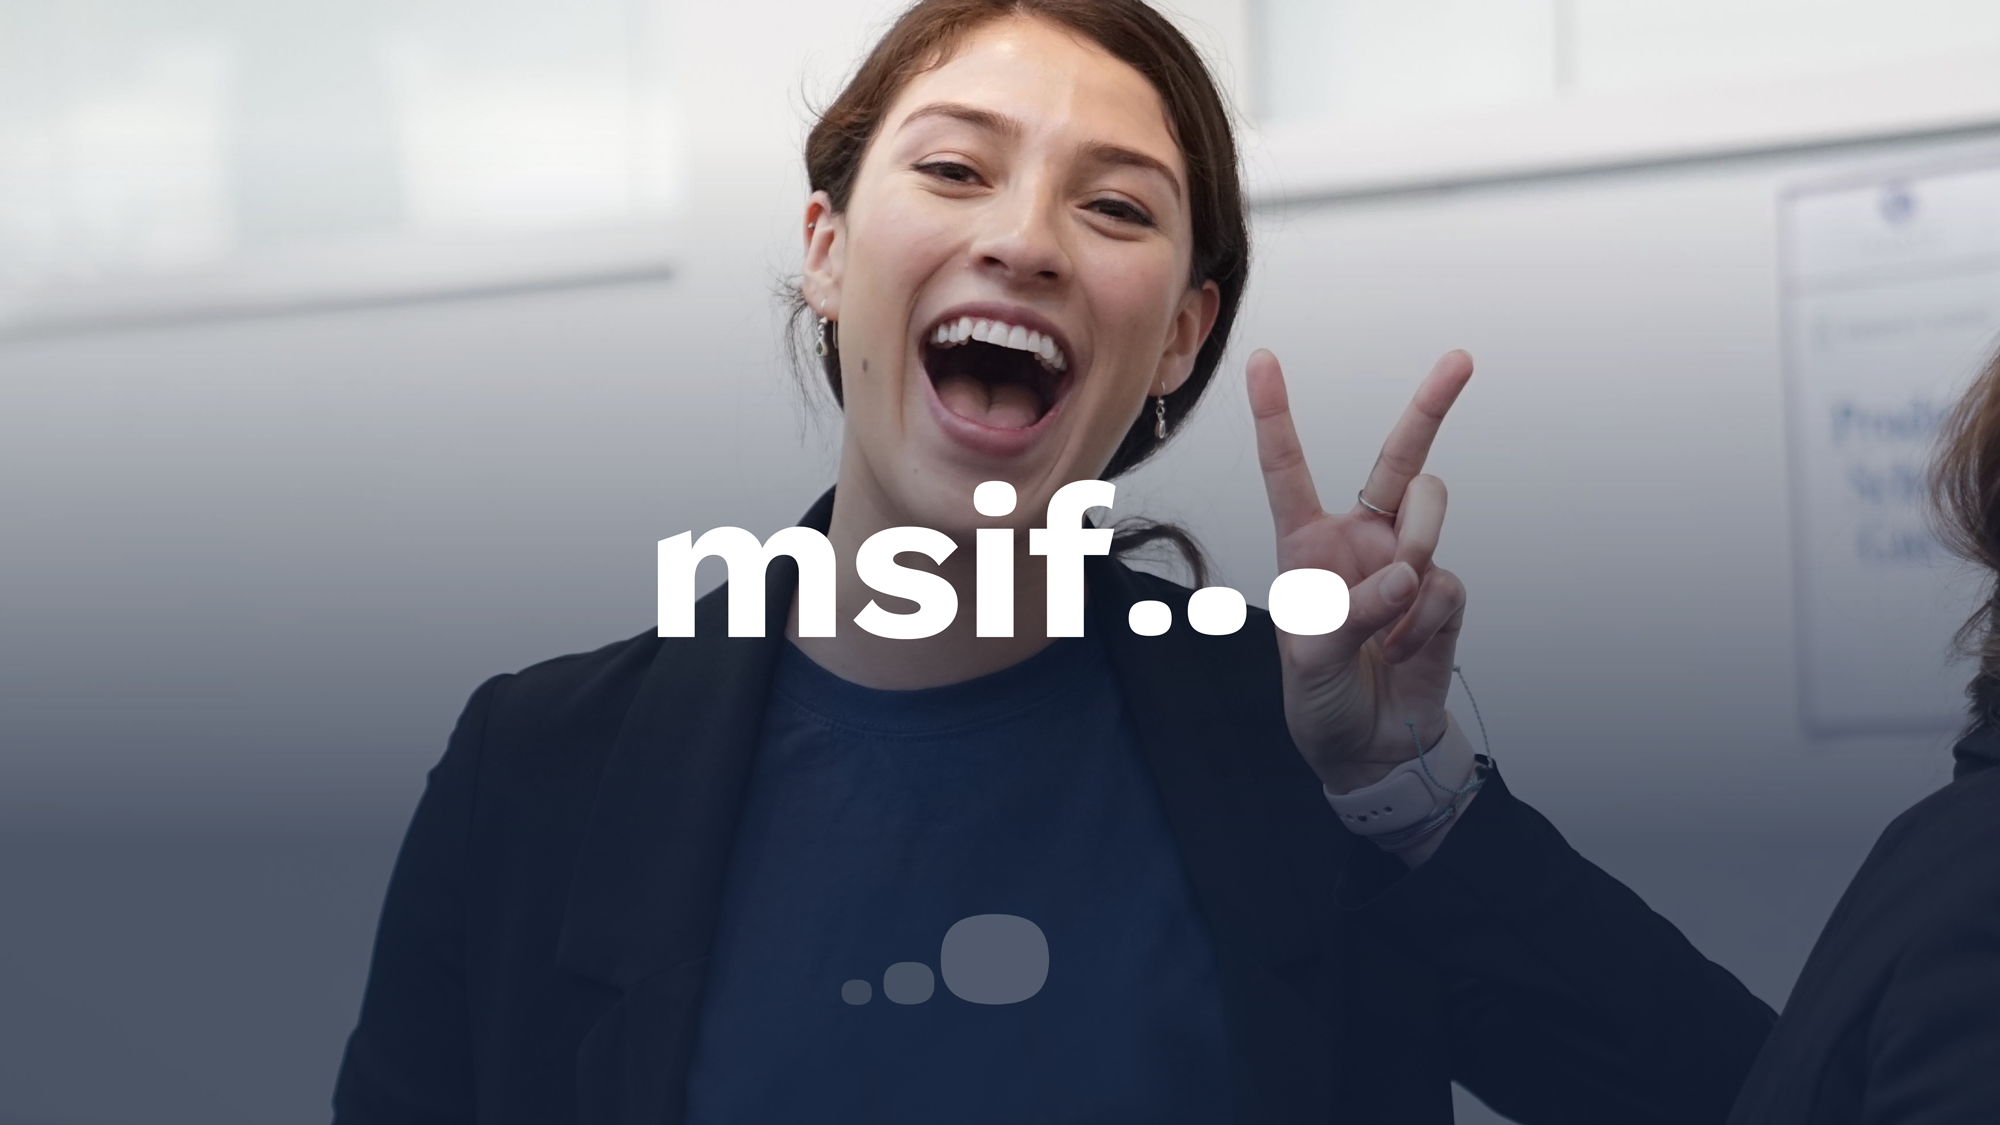 The hero image for MSIF, a project of Liverpool based design agency, Hopeful Studio.